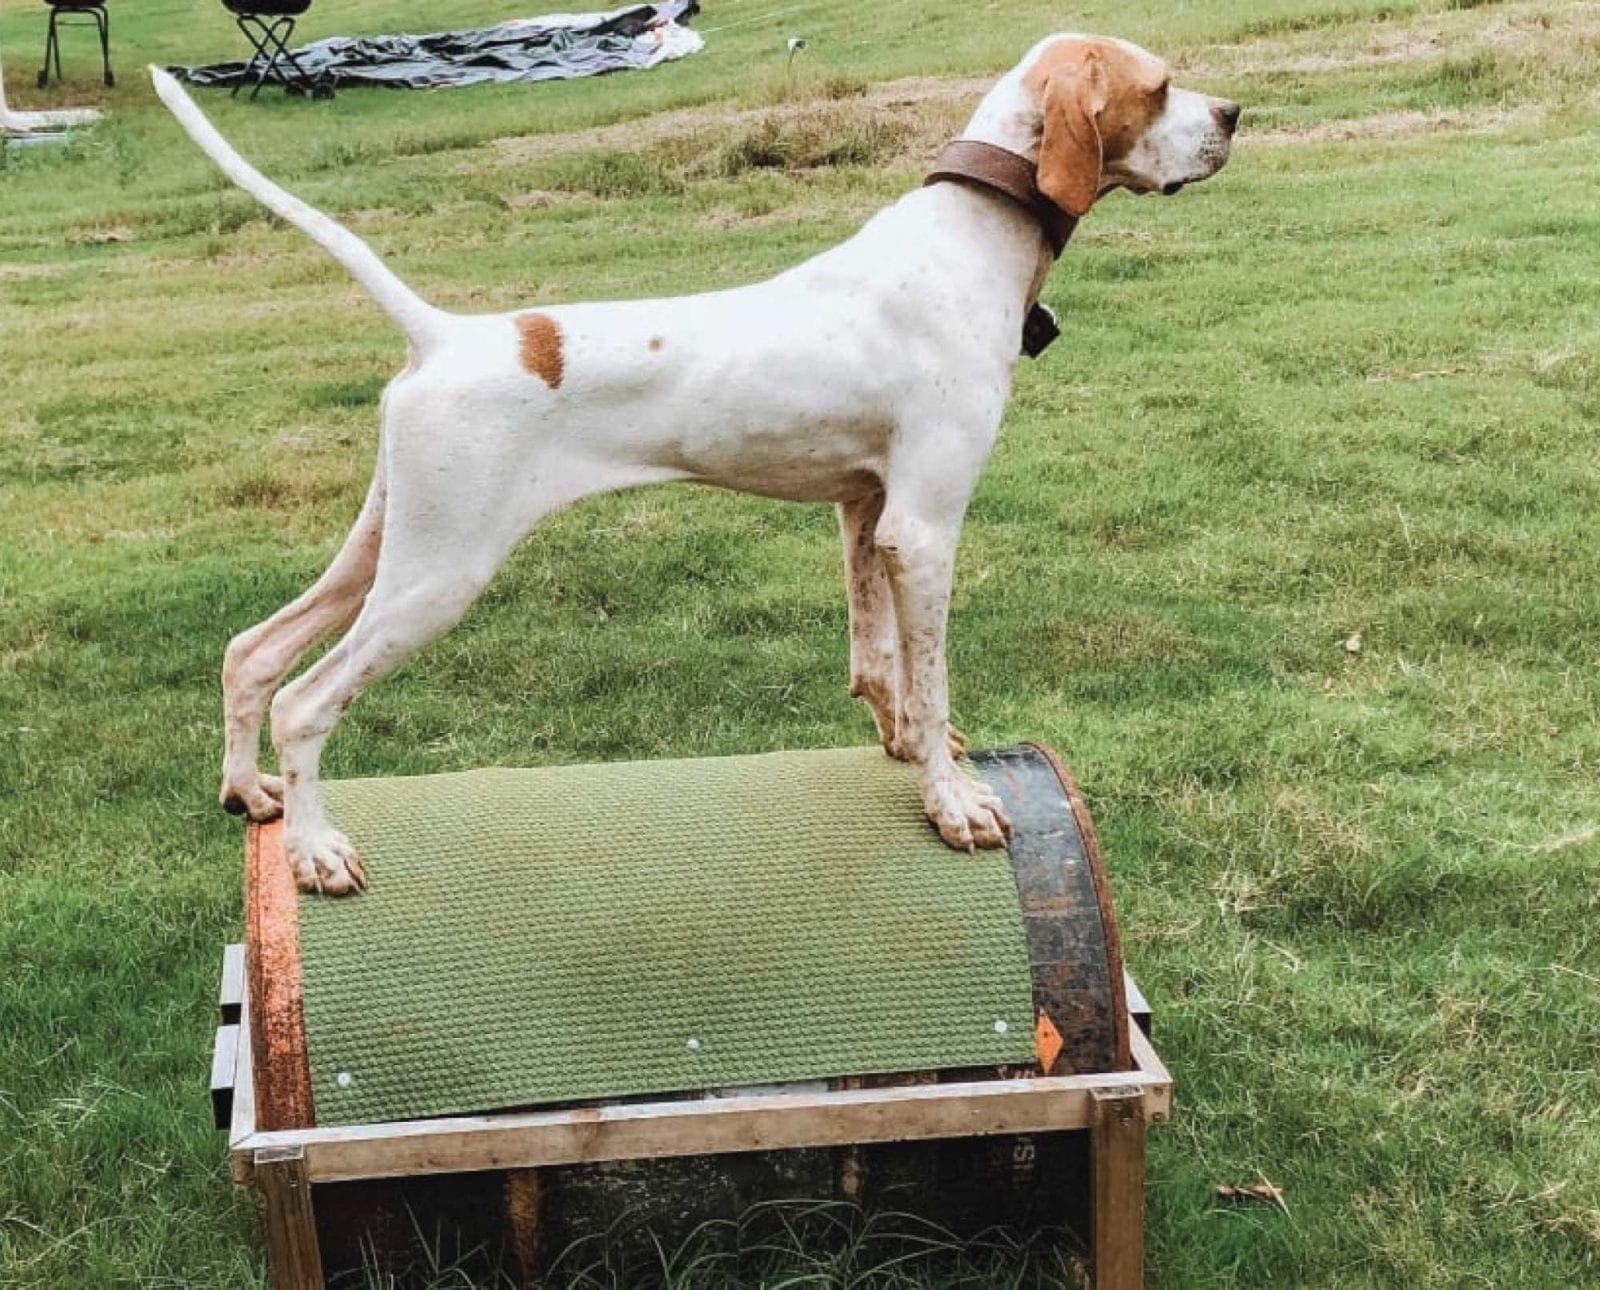 A pointer being whoa trained on a barrel with Durrell Smith